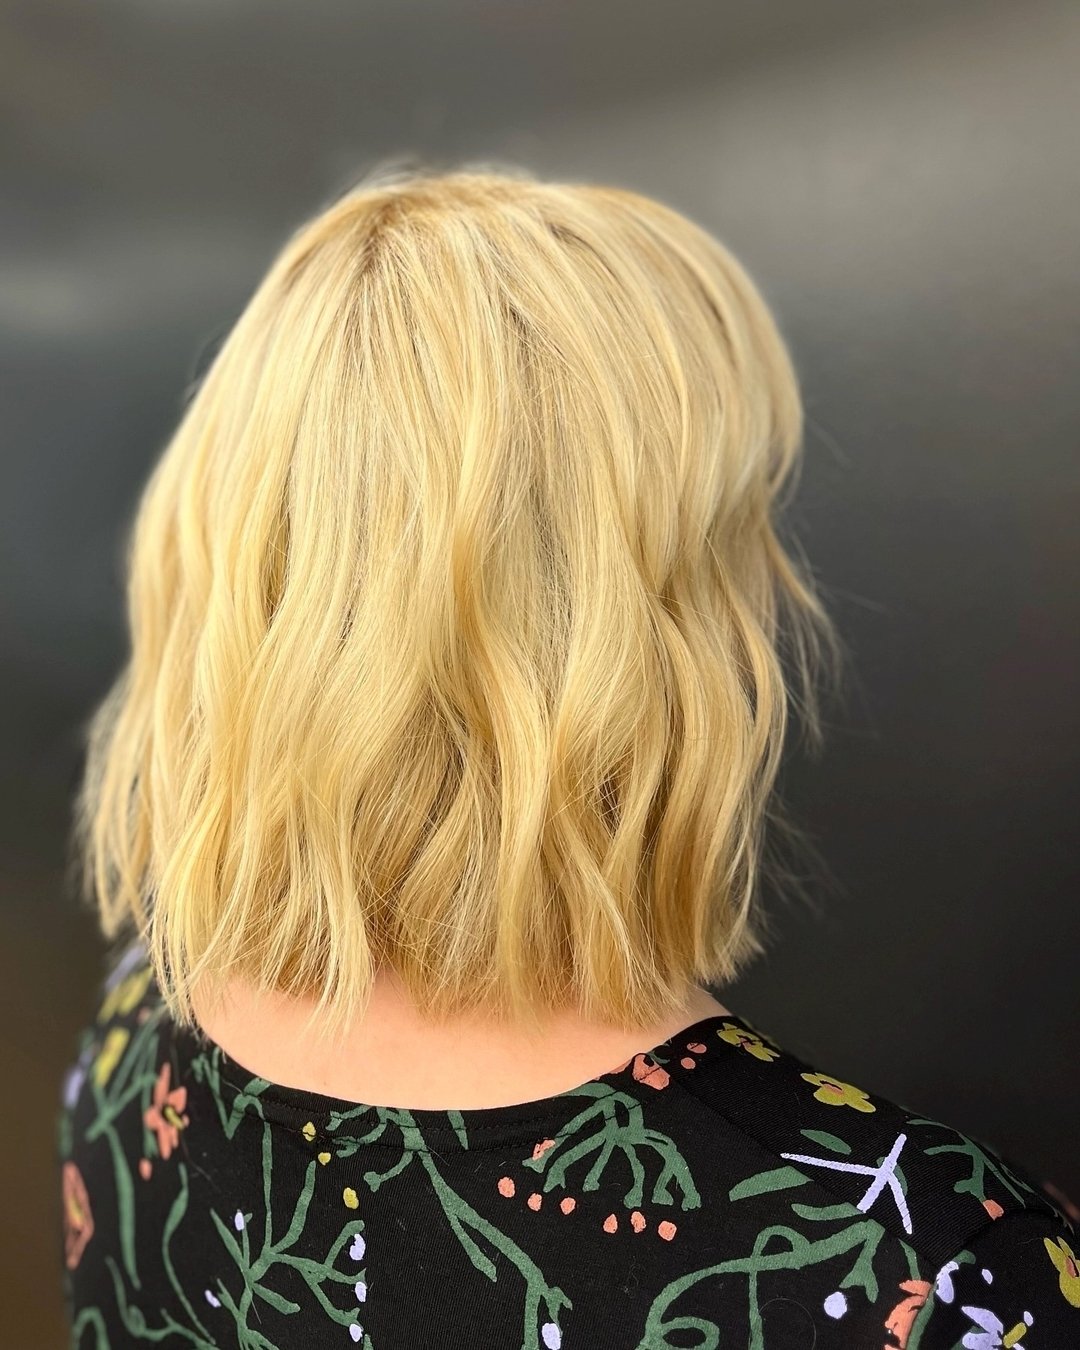 Dime Sarah got a half head of highlights ☀️

Styled with Bumble and bumble Blowdry Accelerator and Illuminated Colour Leave-in Seal Light ❤️

#dimelife #feelinlikeadime #bumbleandbumble #bbnetworksalon  #haircolour  #wellahair #wellacolour #askforwel